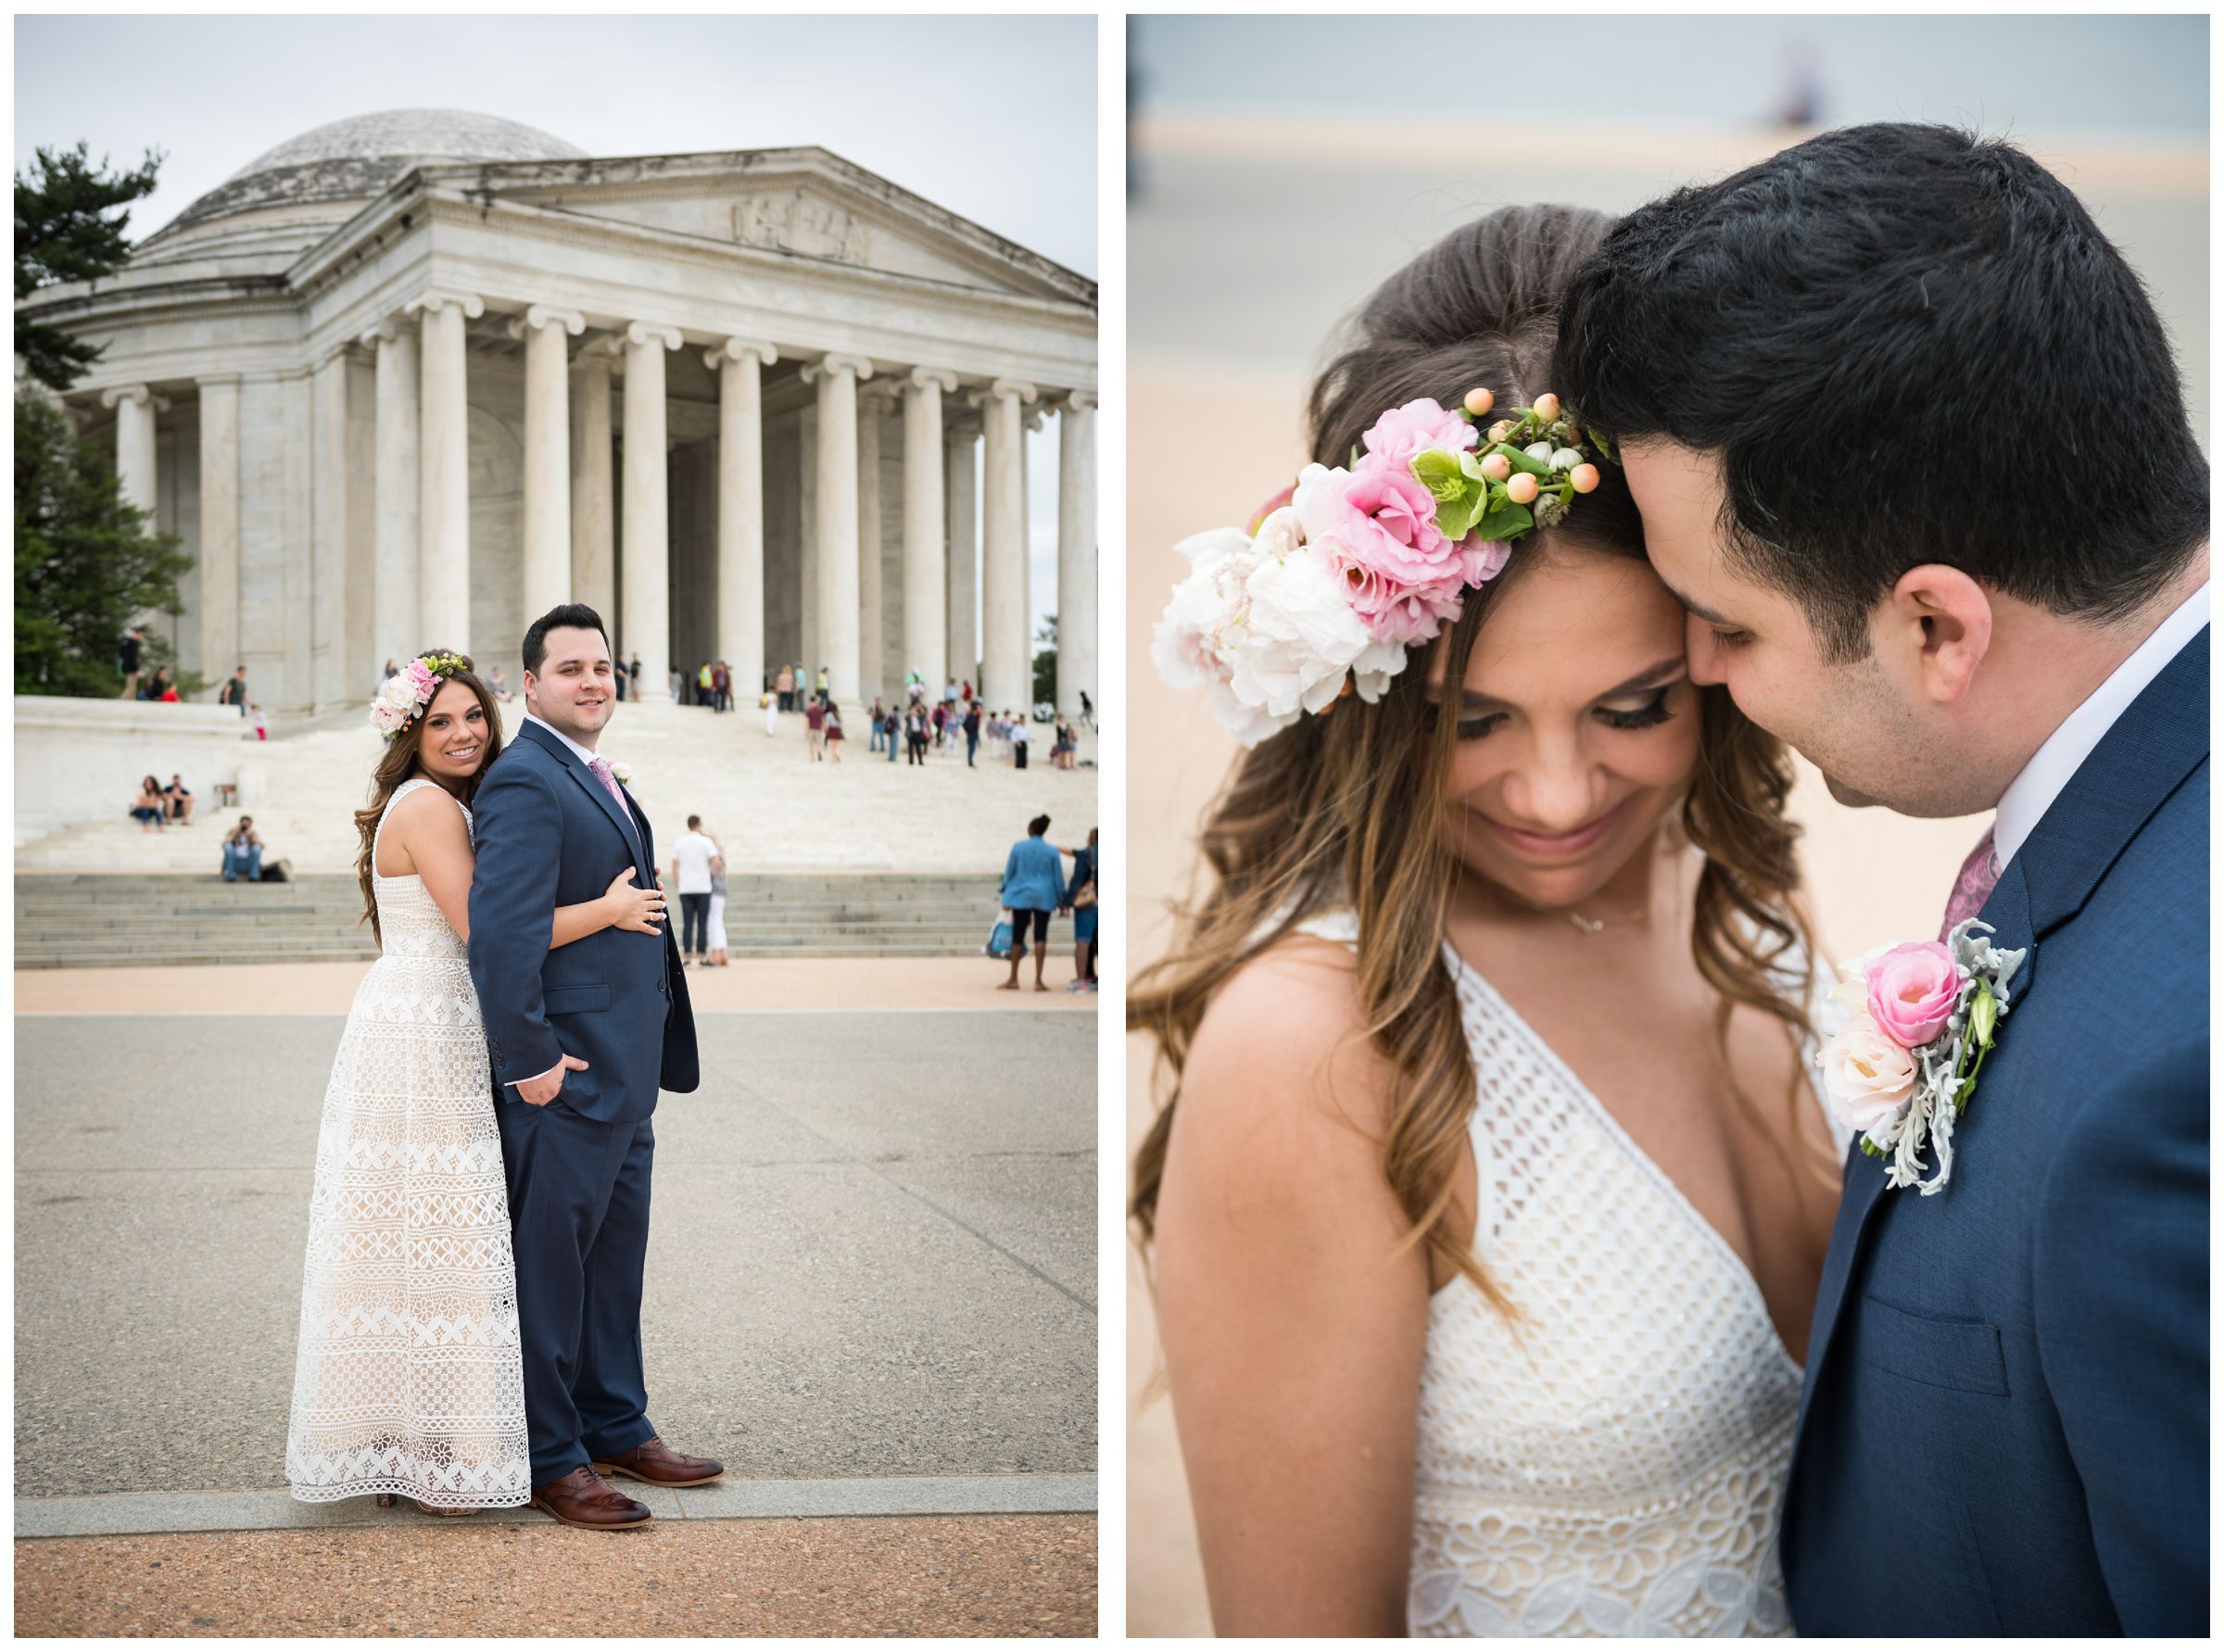 bride with flower crown and groom portraits at the Jefferson Memorial during DC monument wedding day in Washington